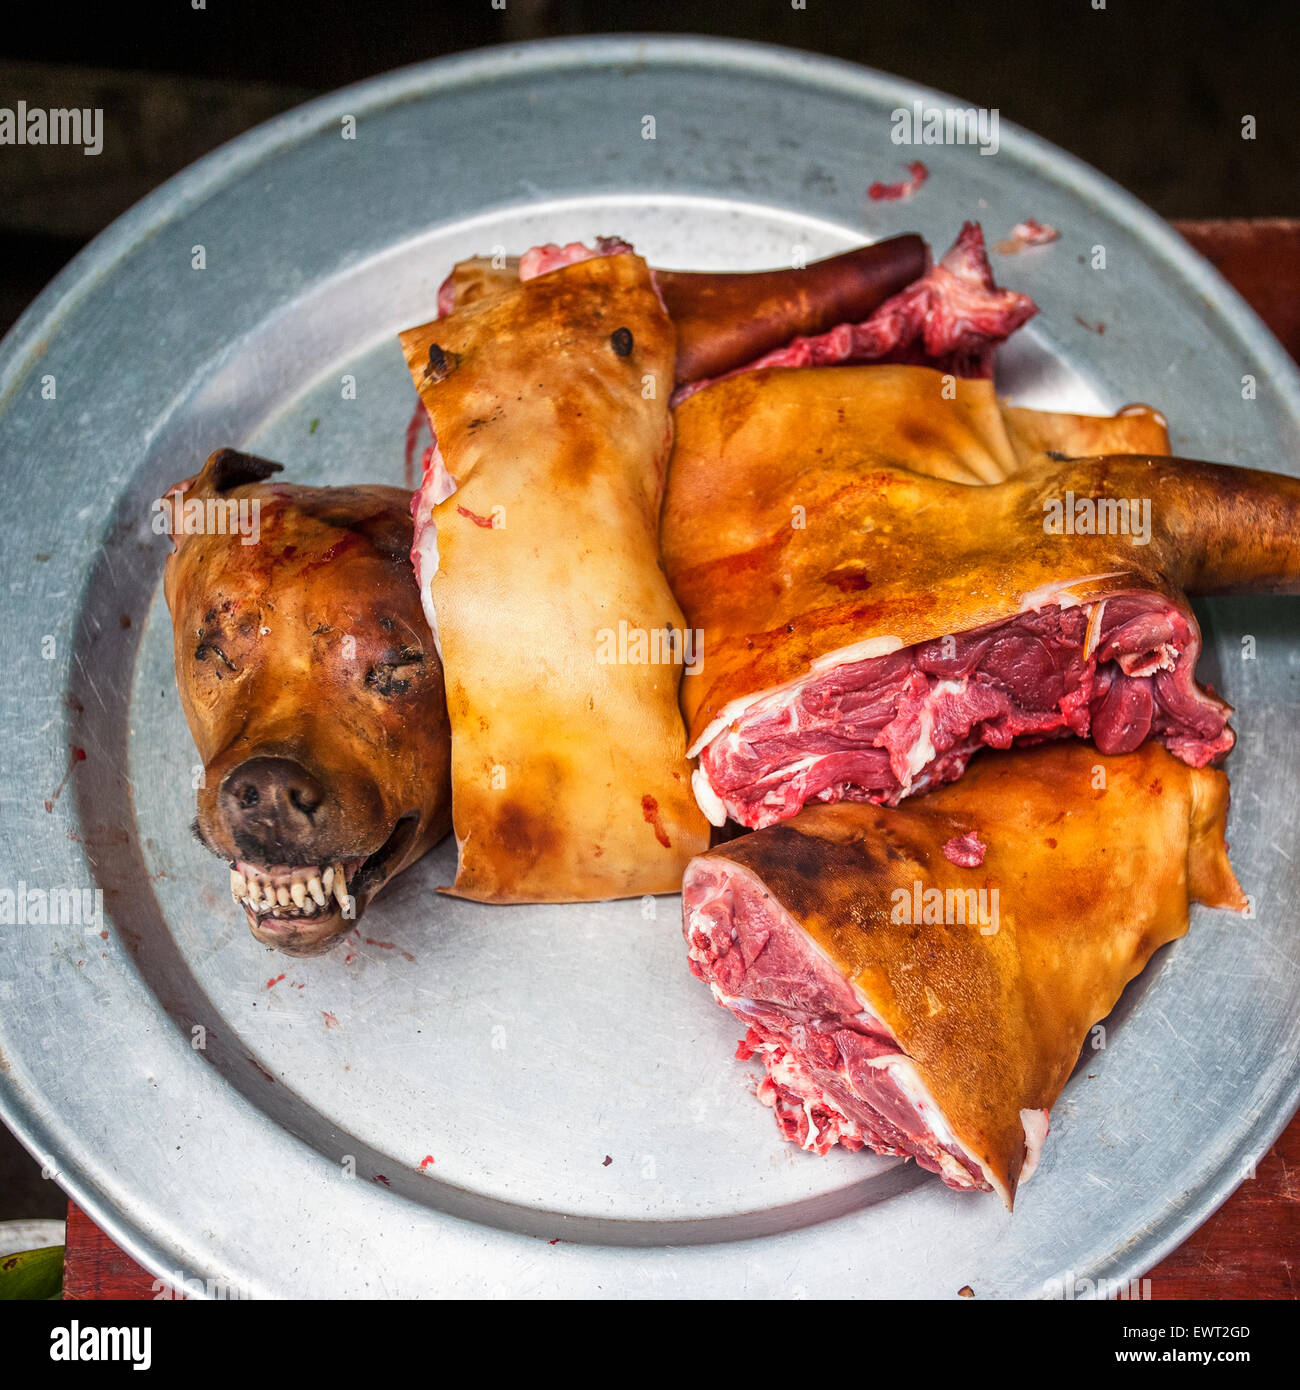 Cooked dog on a plate in Sapa,Vietnam. Stock Photo